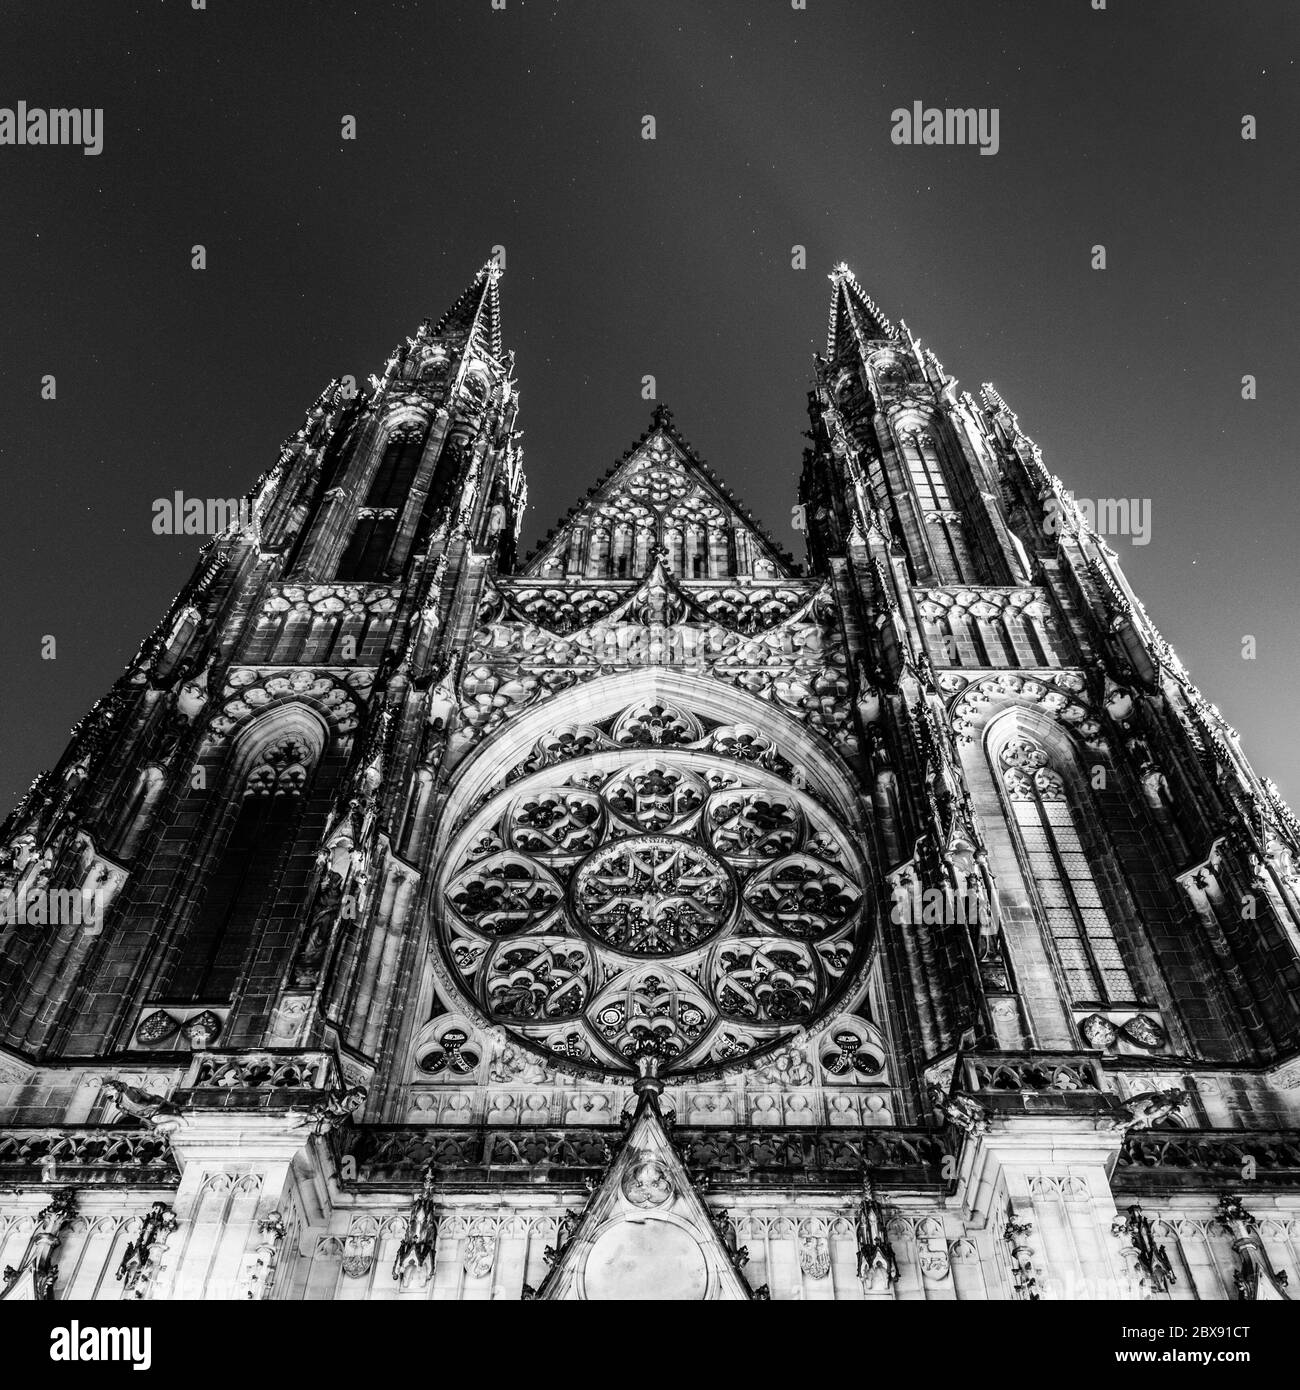 Front view of St. Vitus cathedral in Prague Castle by night, Prague, Czech Republic. Black and white image. Stock Photo